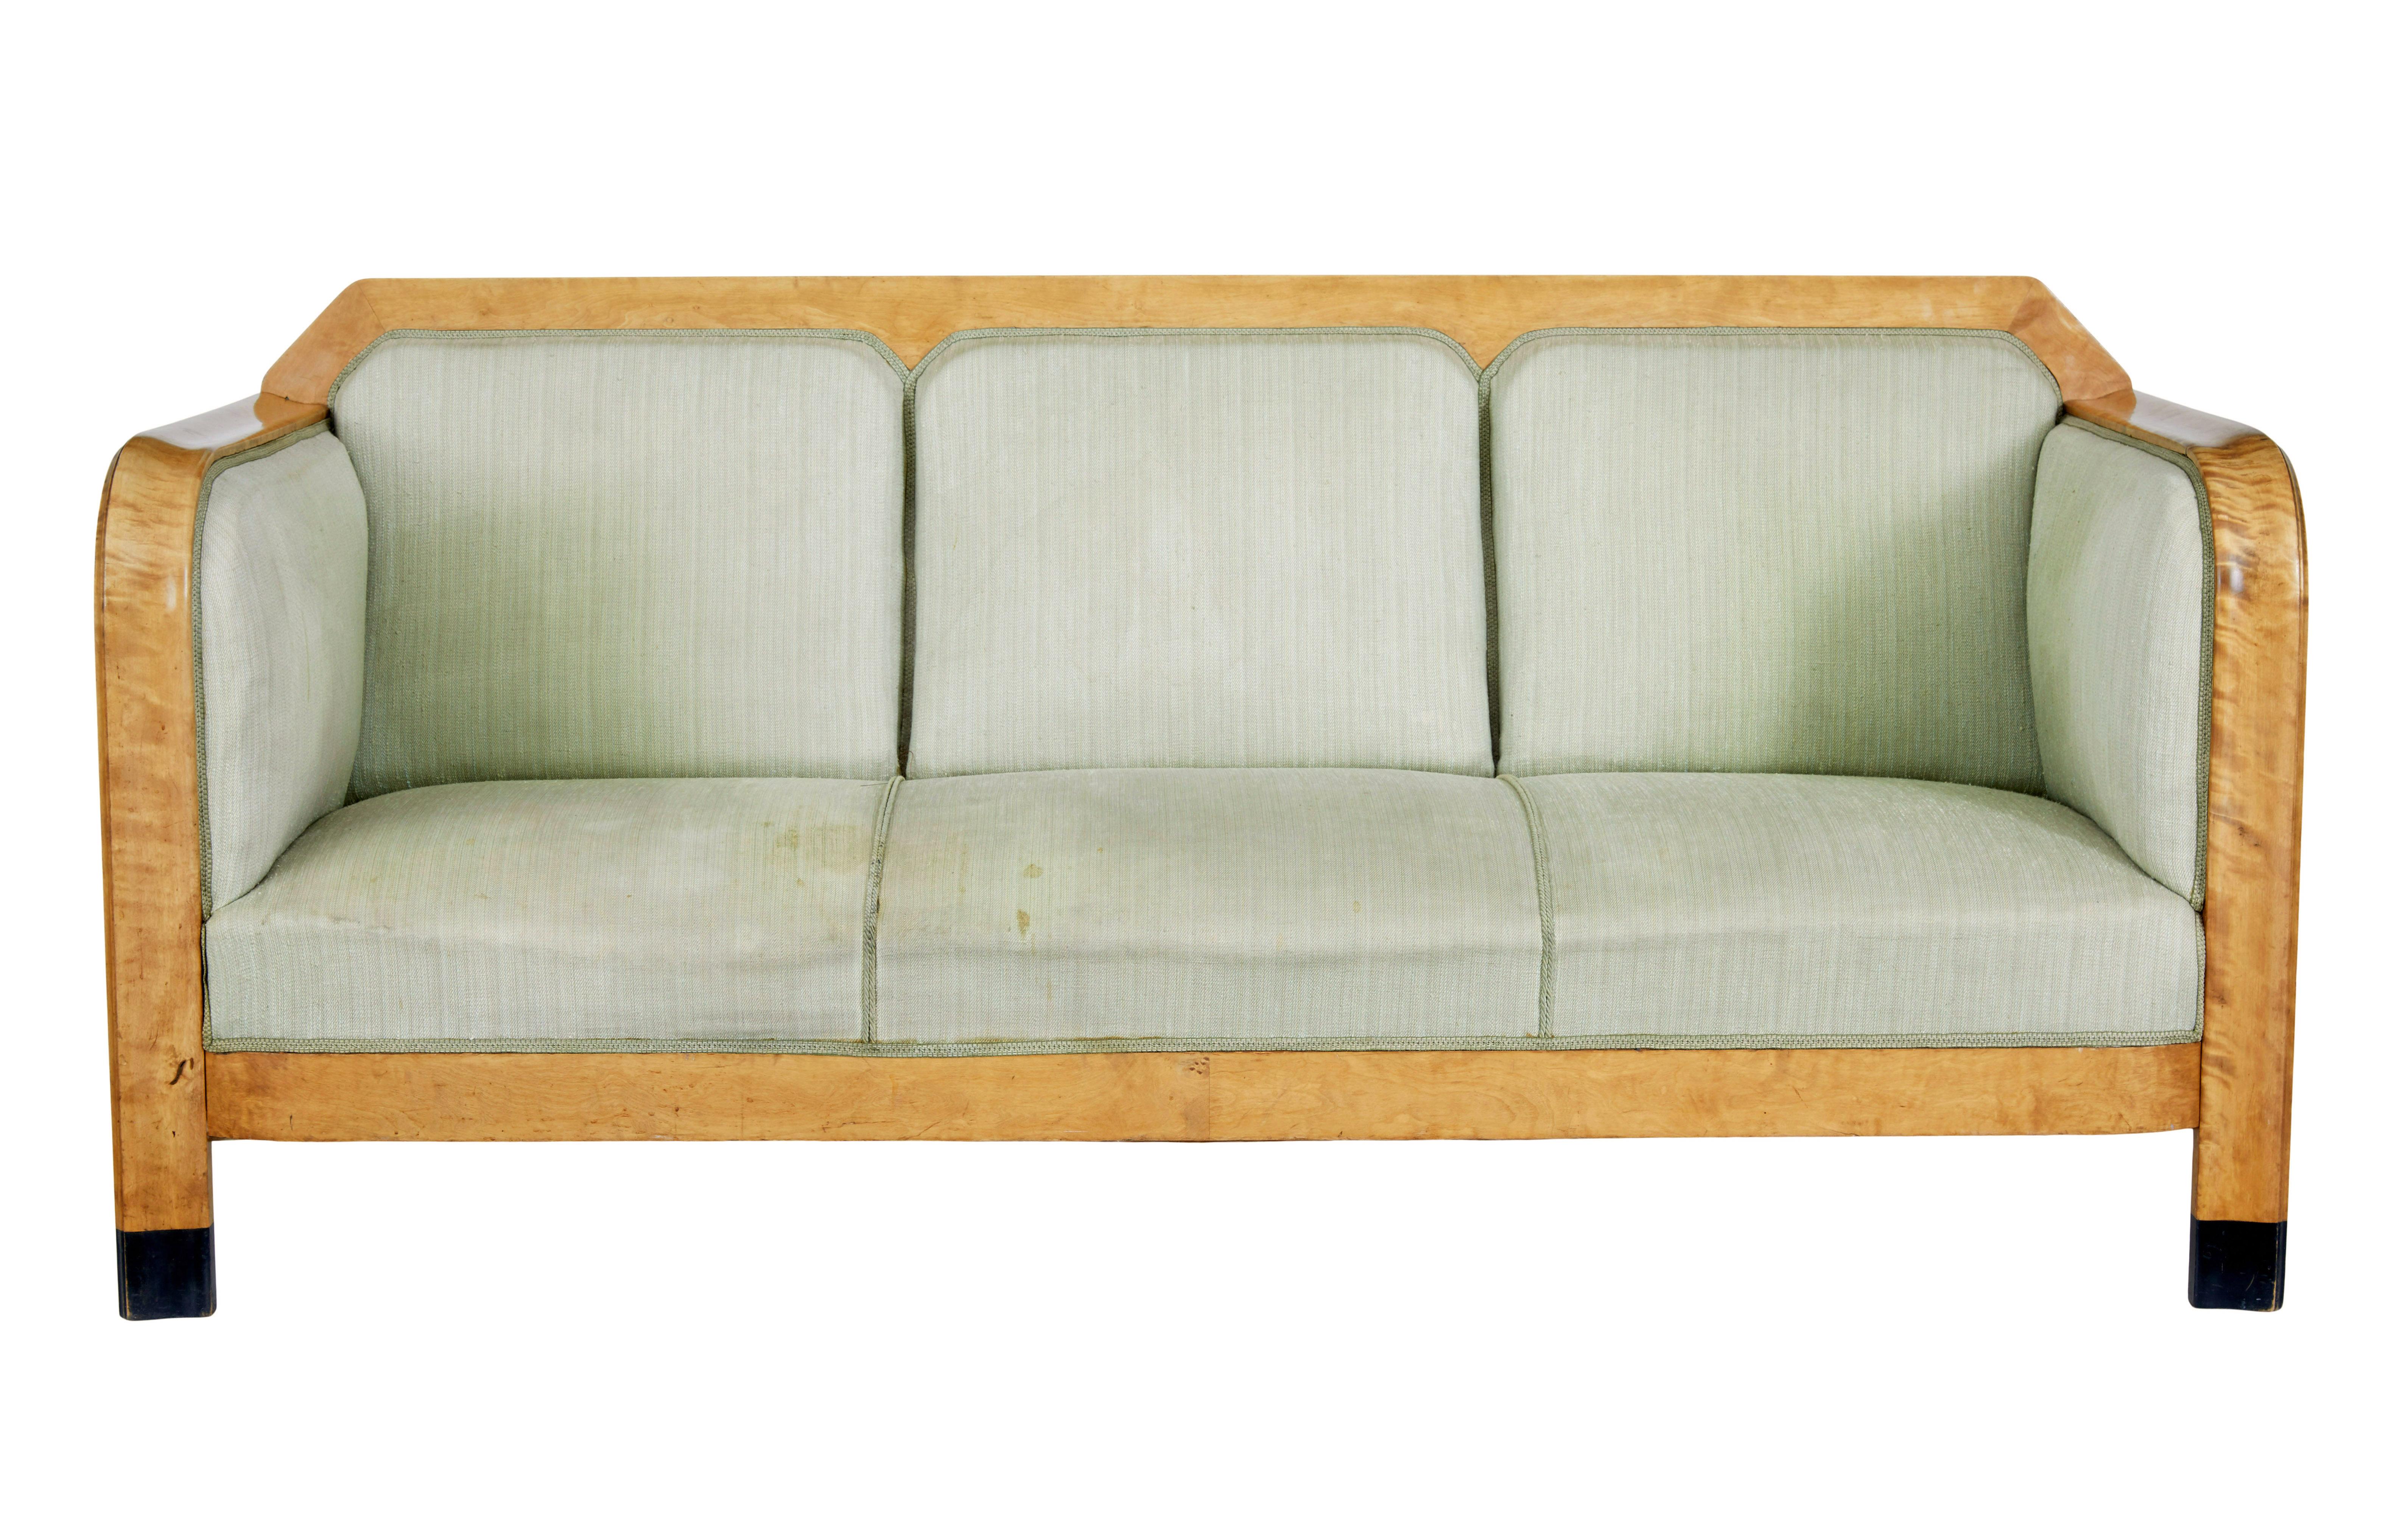 Early 20th century swedish birch sofa, circa 1900.

Large proportioned comfortable 3 seater sofa. Flowing arms with straight solid sides. Upholstery shaped to form 3 seats.  Ebonised tips to from legs.

Very comfortable sofa, which is need of